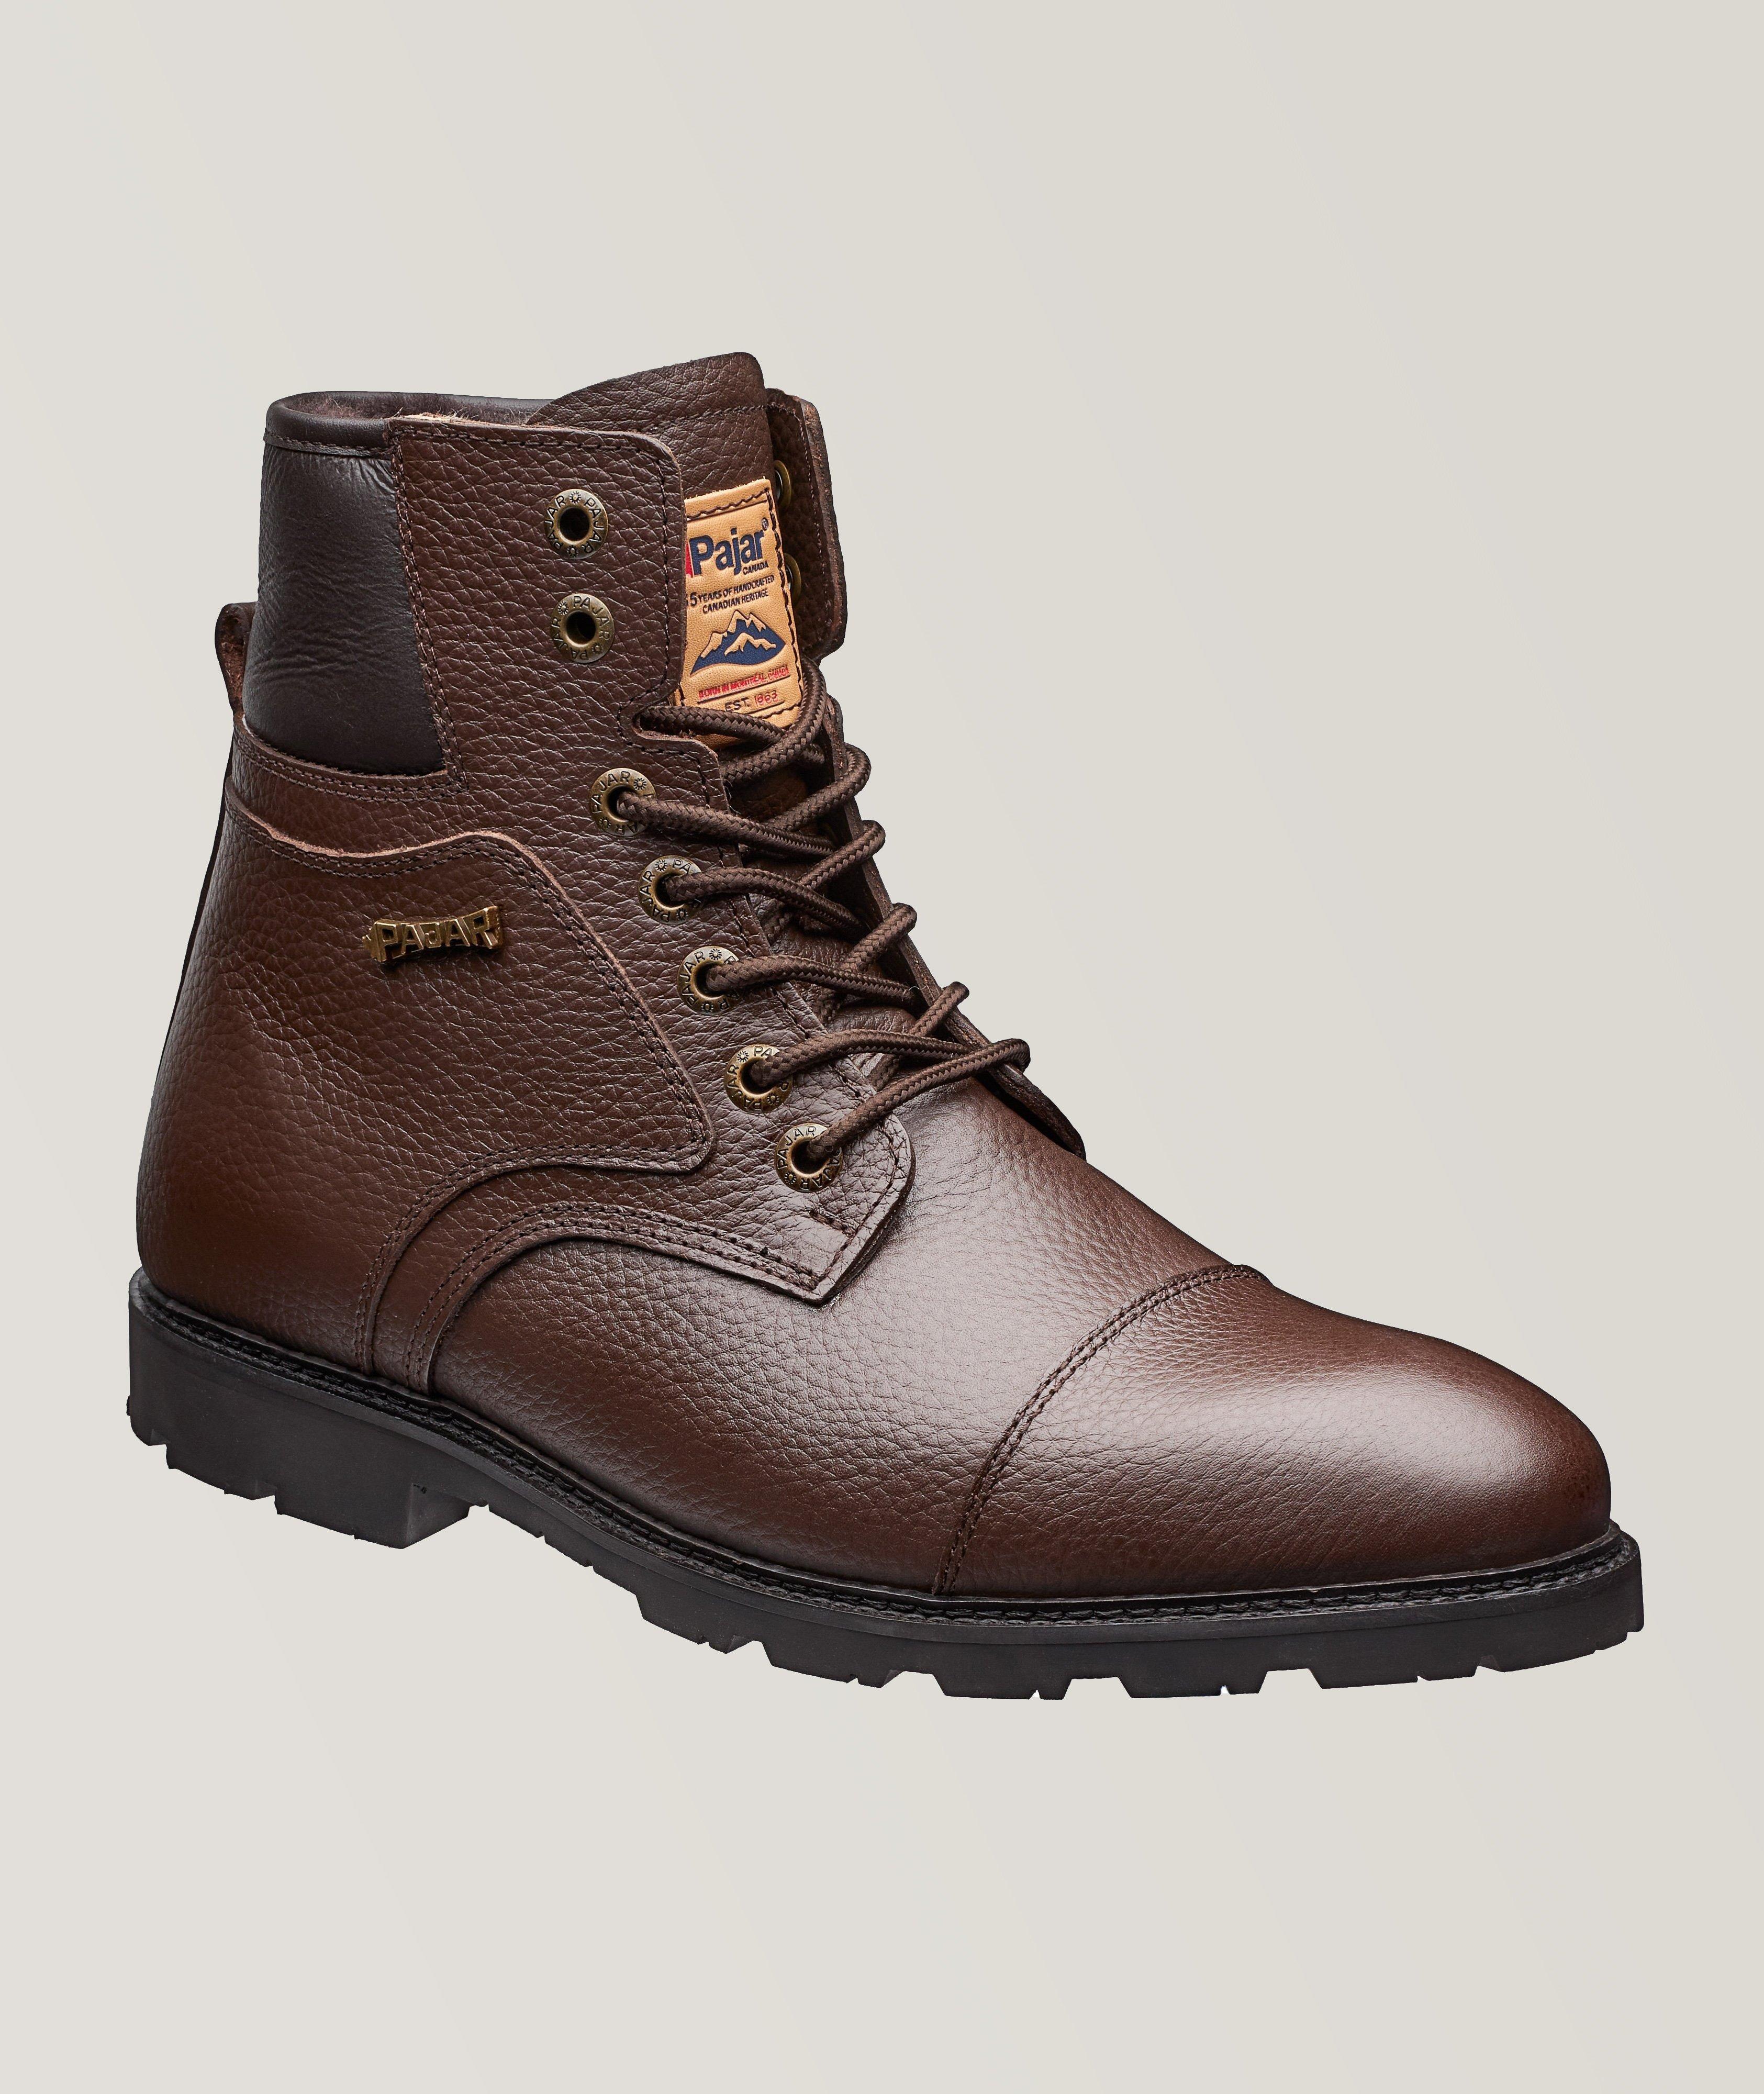 Kevin Waterproof Leather-Shearling Boots image 0